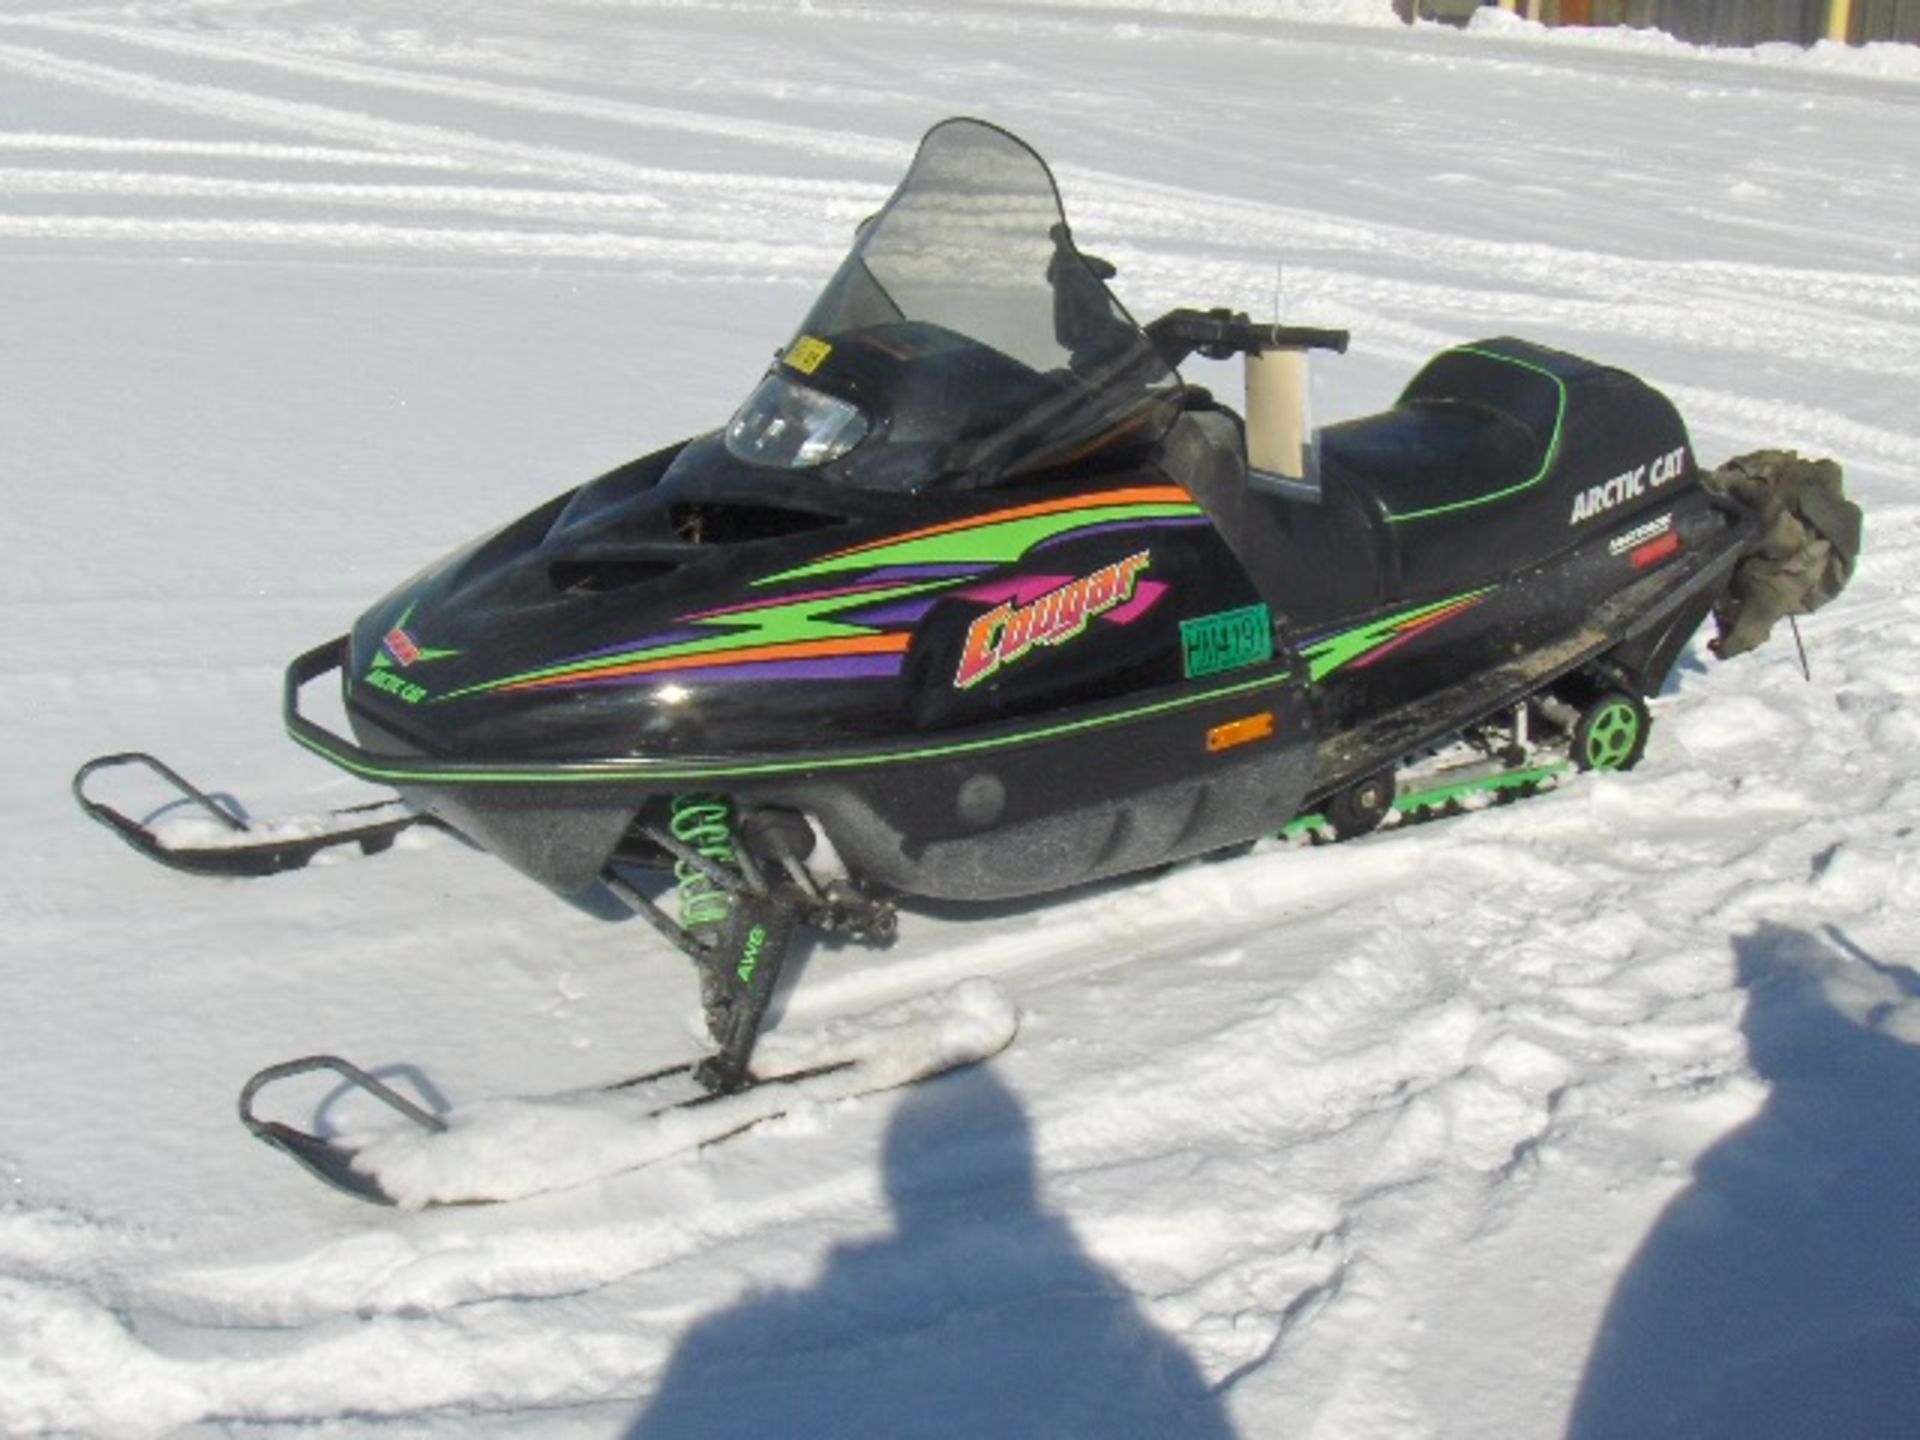 1997 ARCTIC CAT 550 COUGAR  9704424 snowmobile, owner started at time of auction check in, cobra